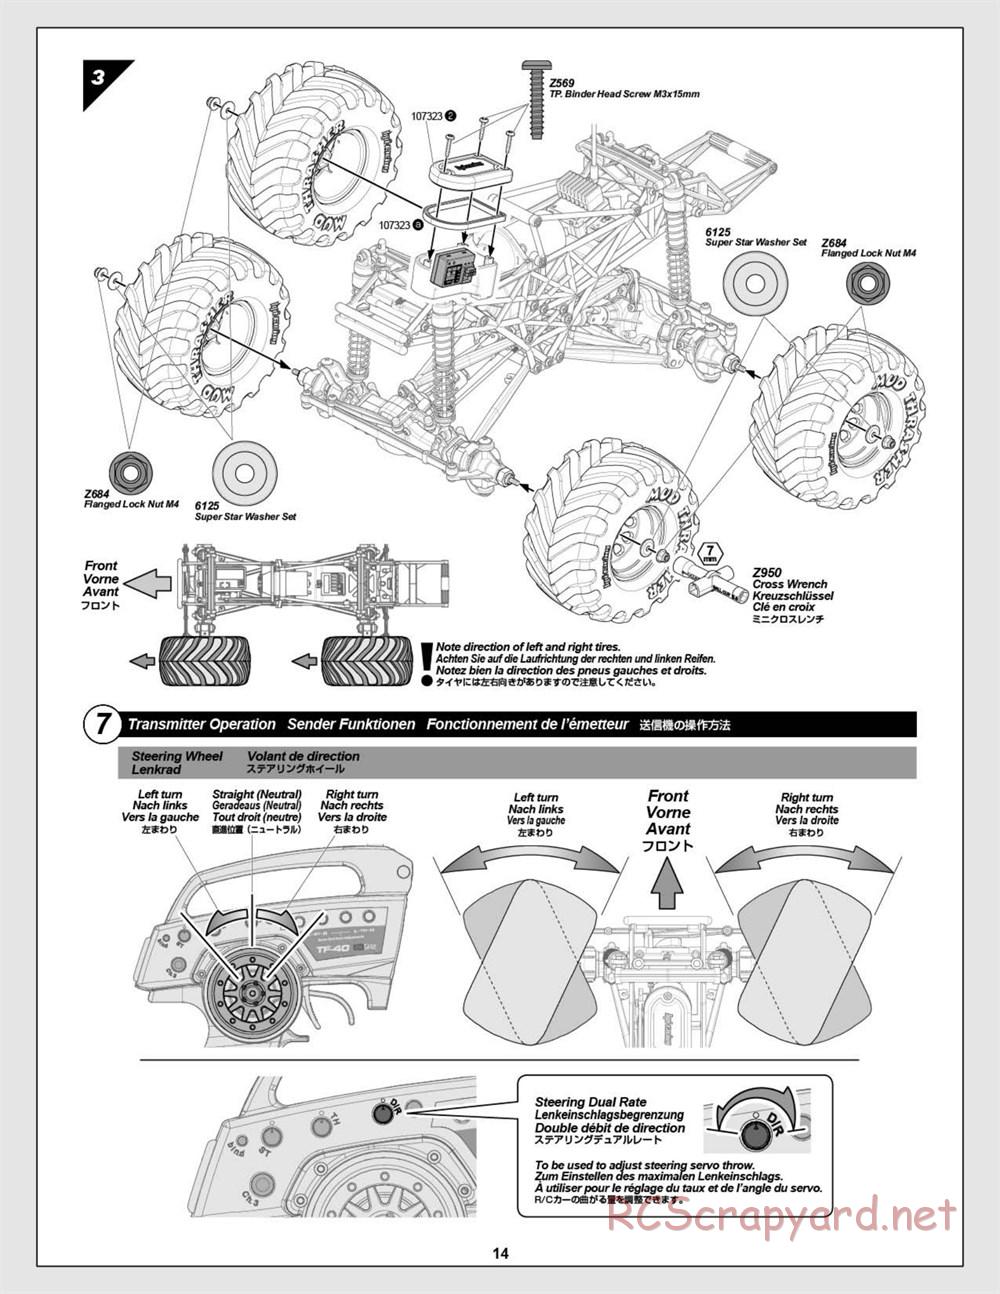 HPI - Wheely King 4x4 - Manual - Page 14